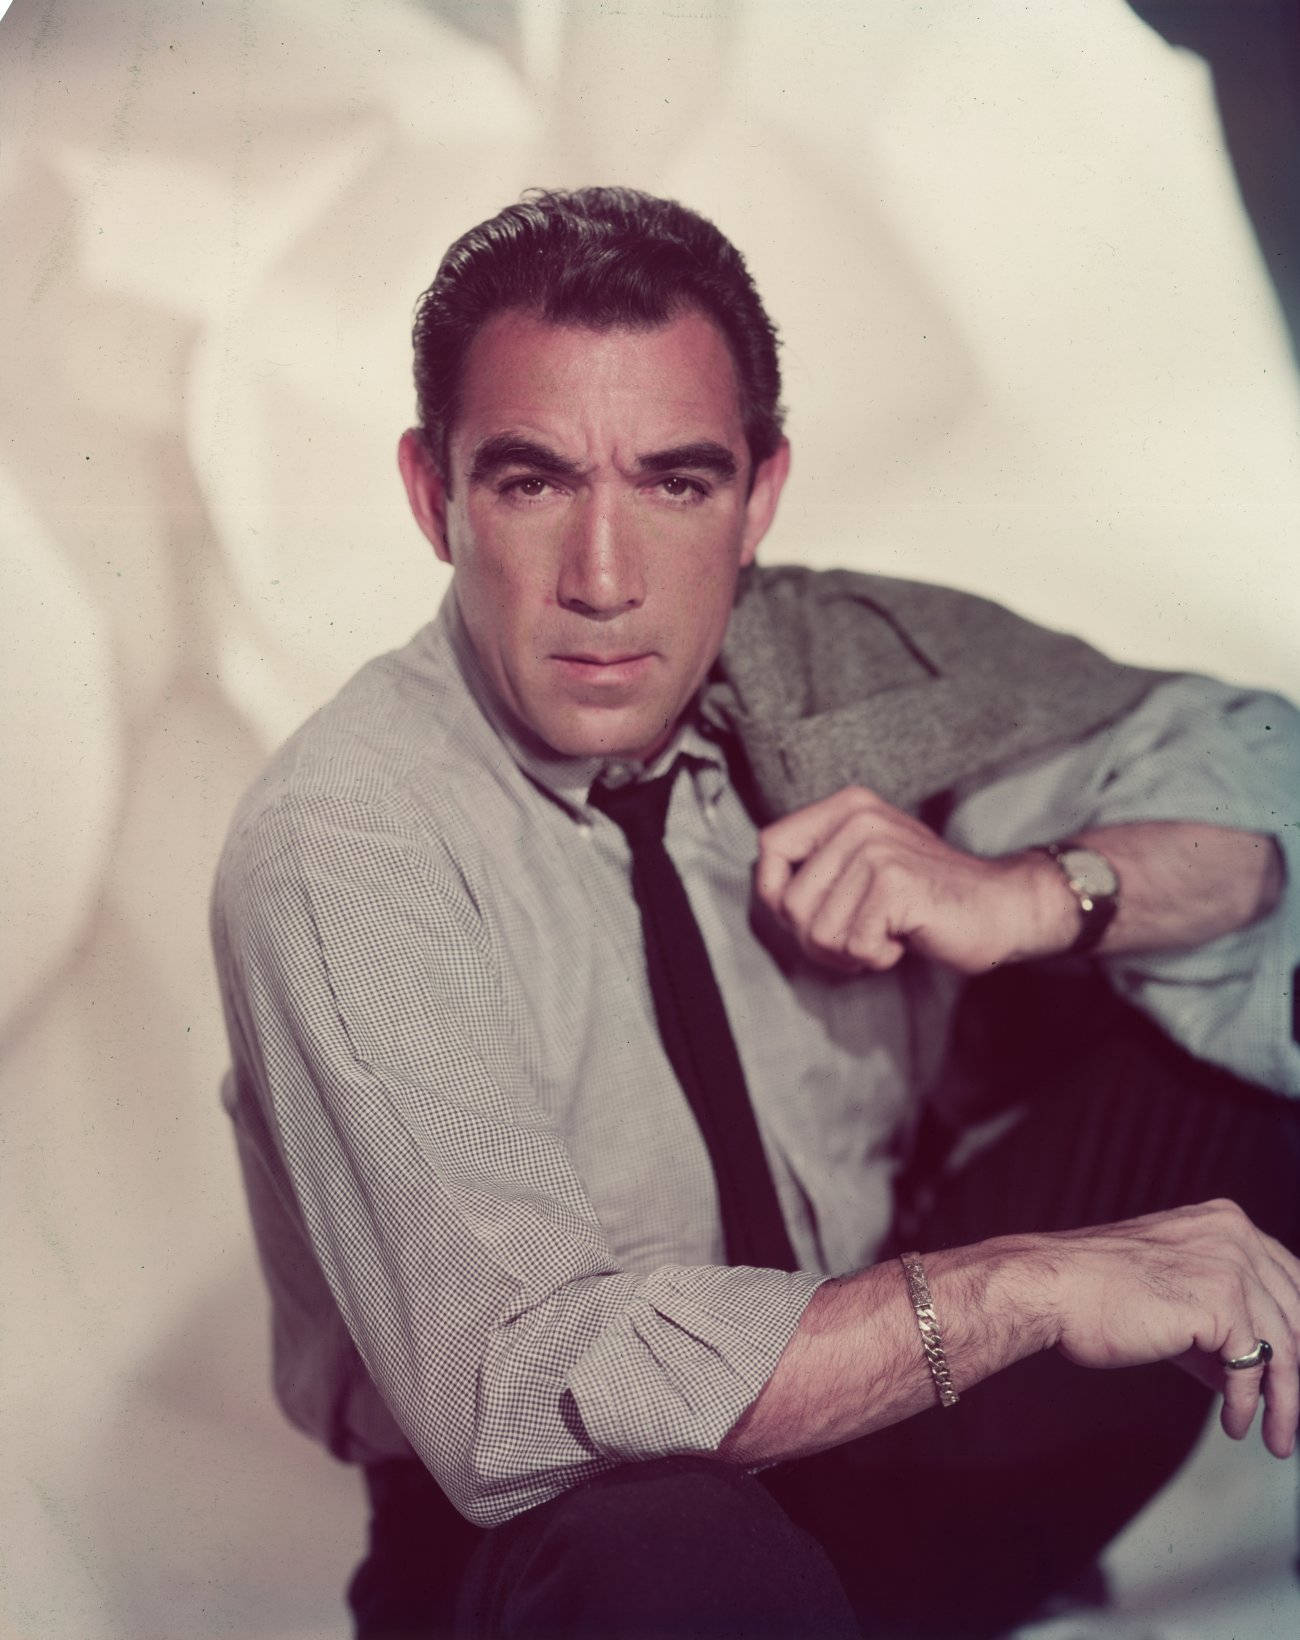 "Legendary actor Anthony Quinn posing with his Academy Award." Wallpaper